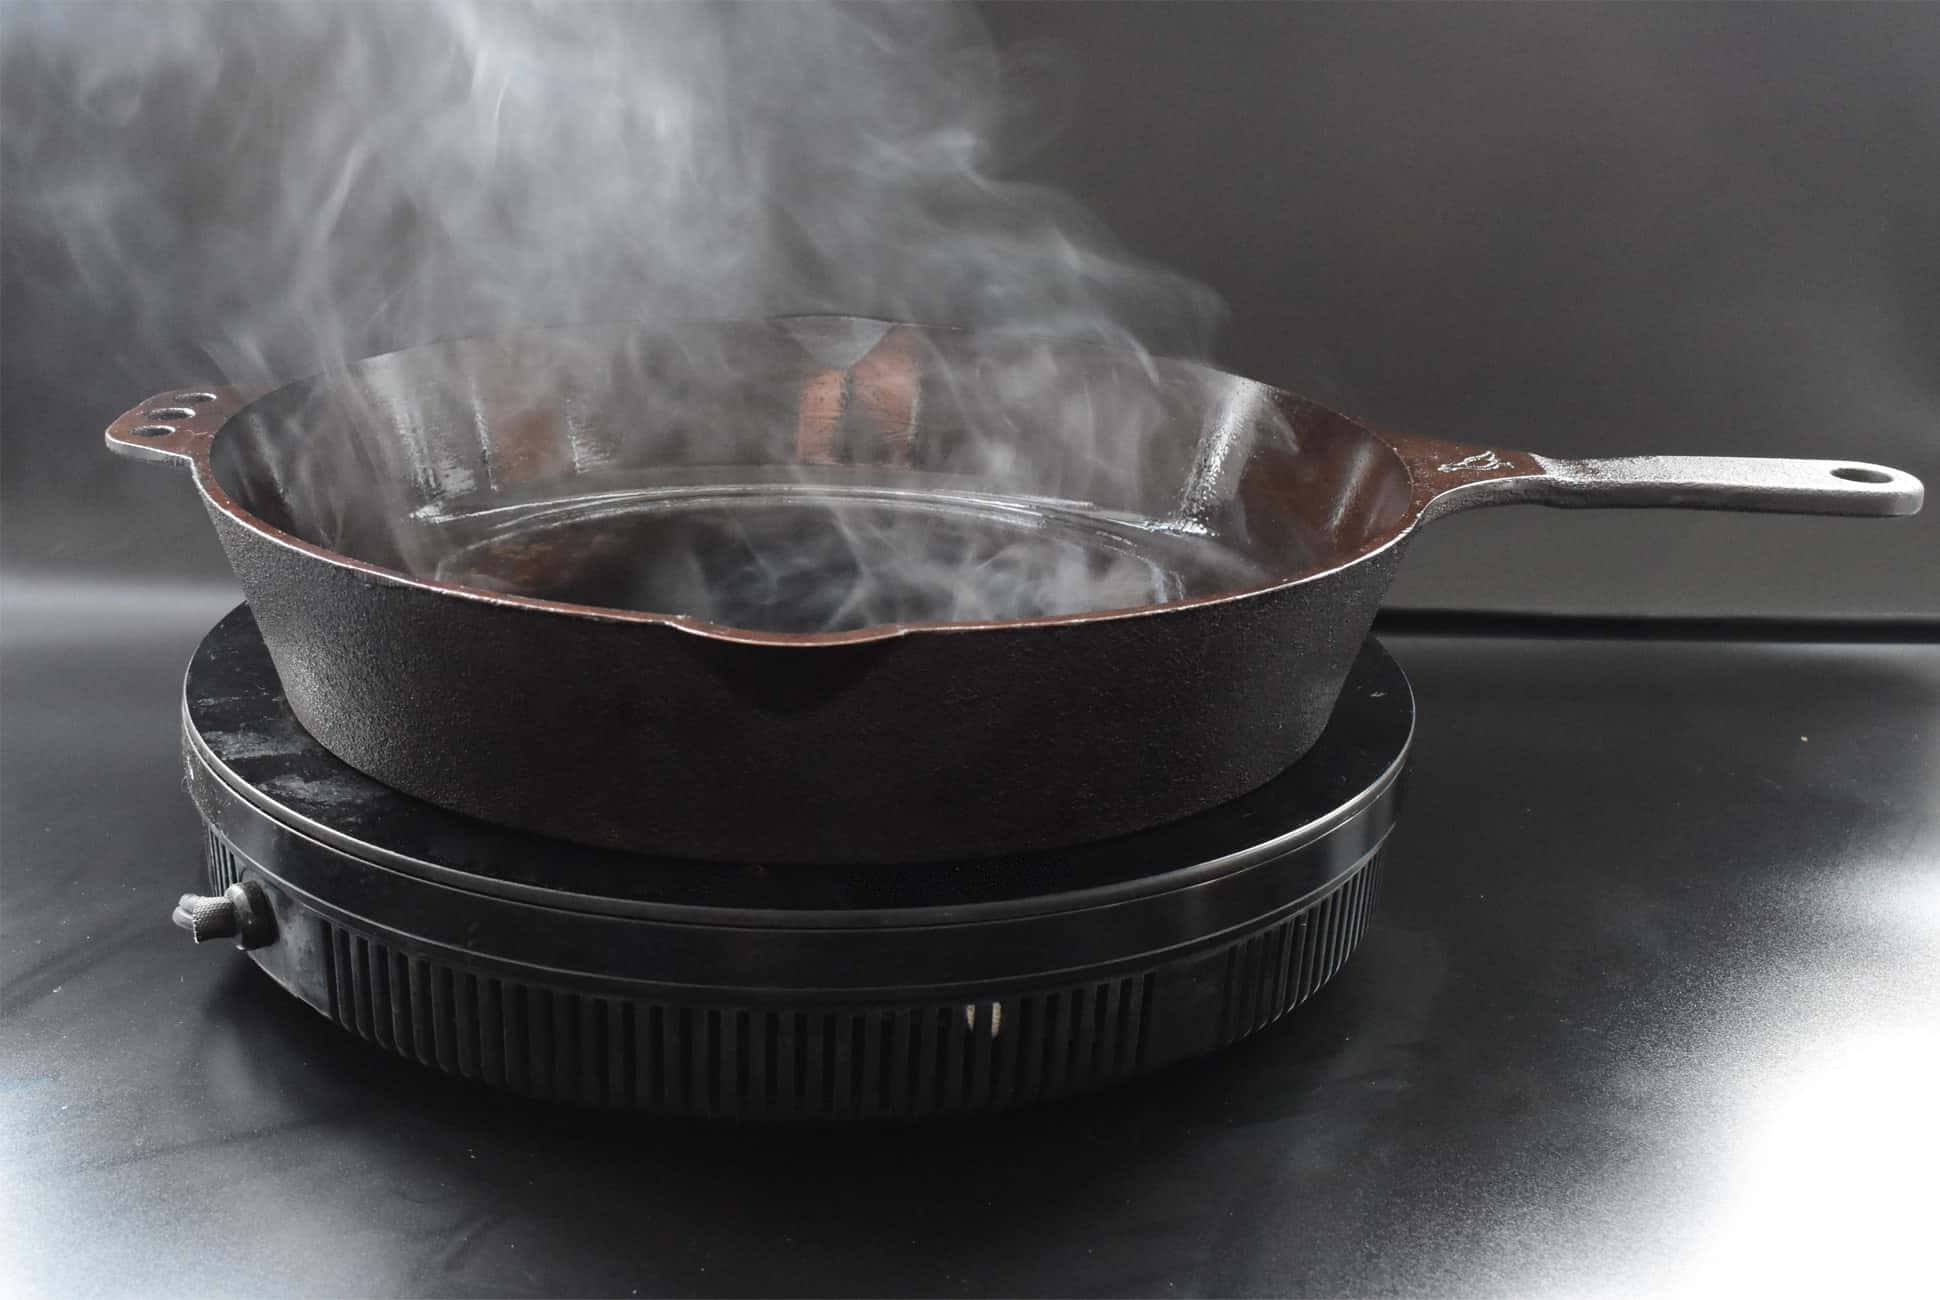 Having Problems Seasoning Your Cast-Iron Skillet? This Method Is Faster and Easier.